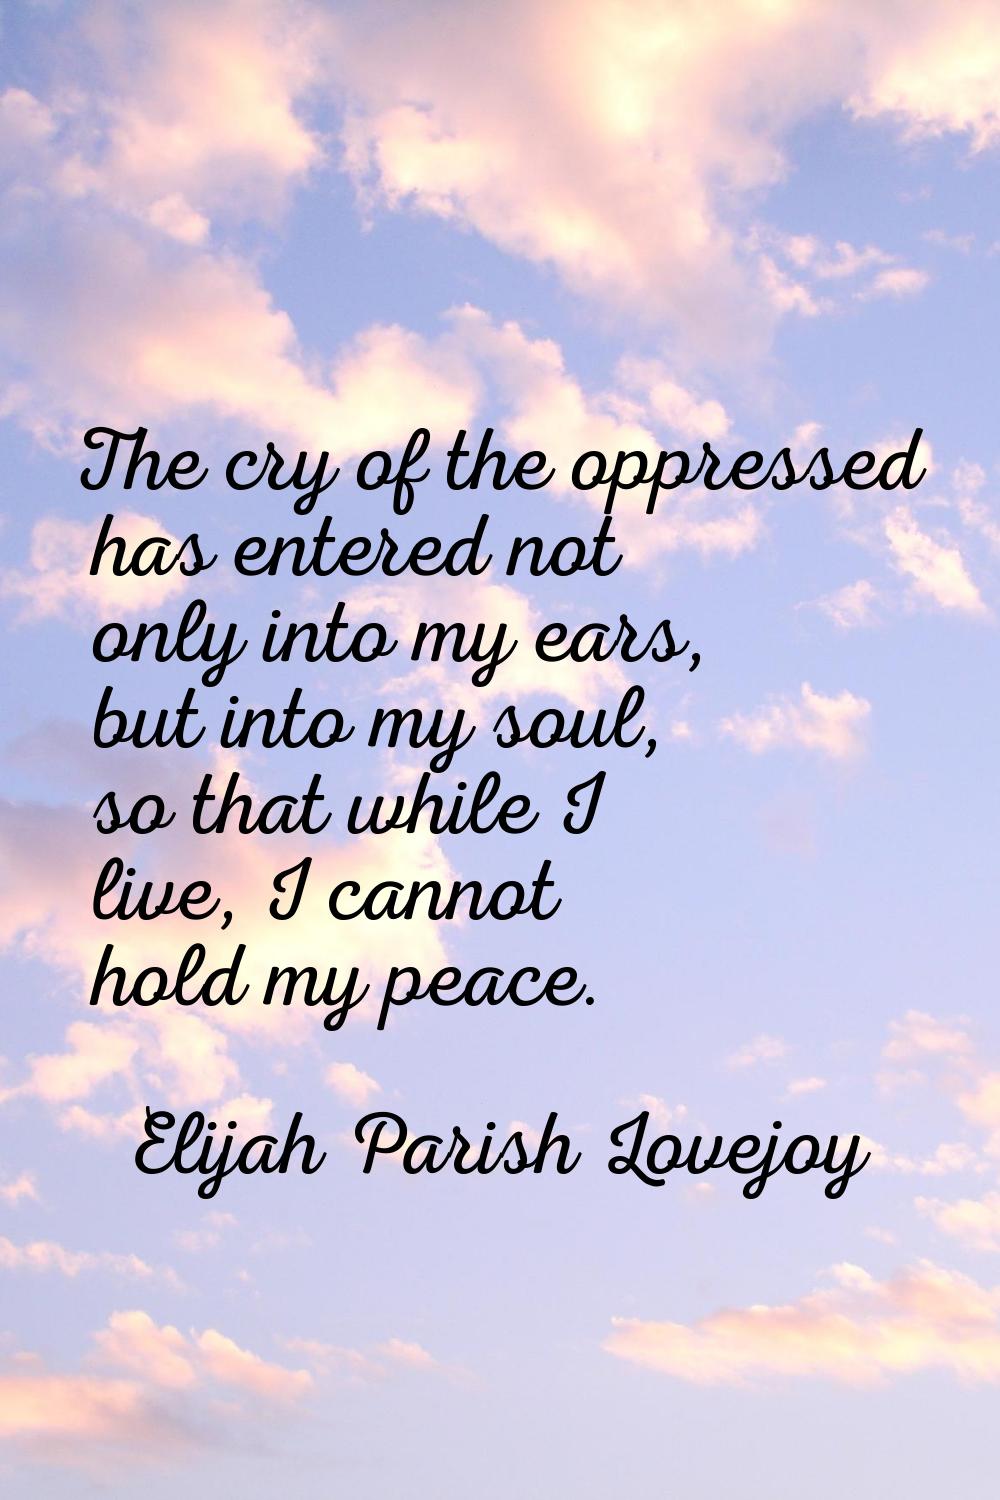 The cry of the oppressed has entered not only into my ears, but into my soul, so that while I live,